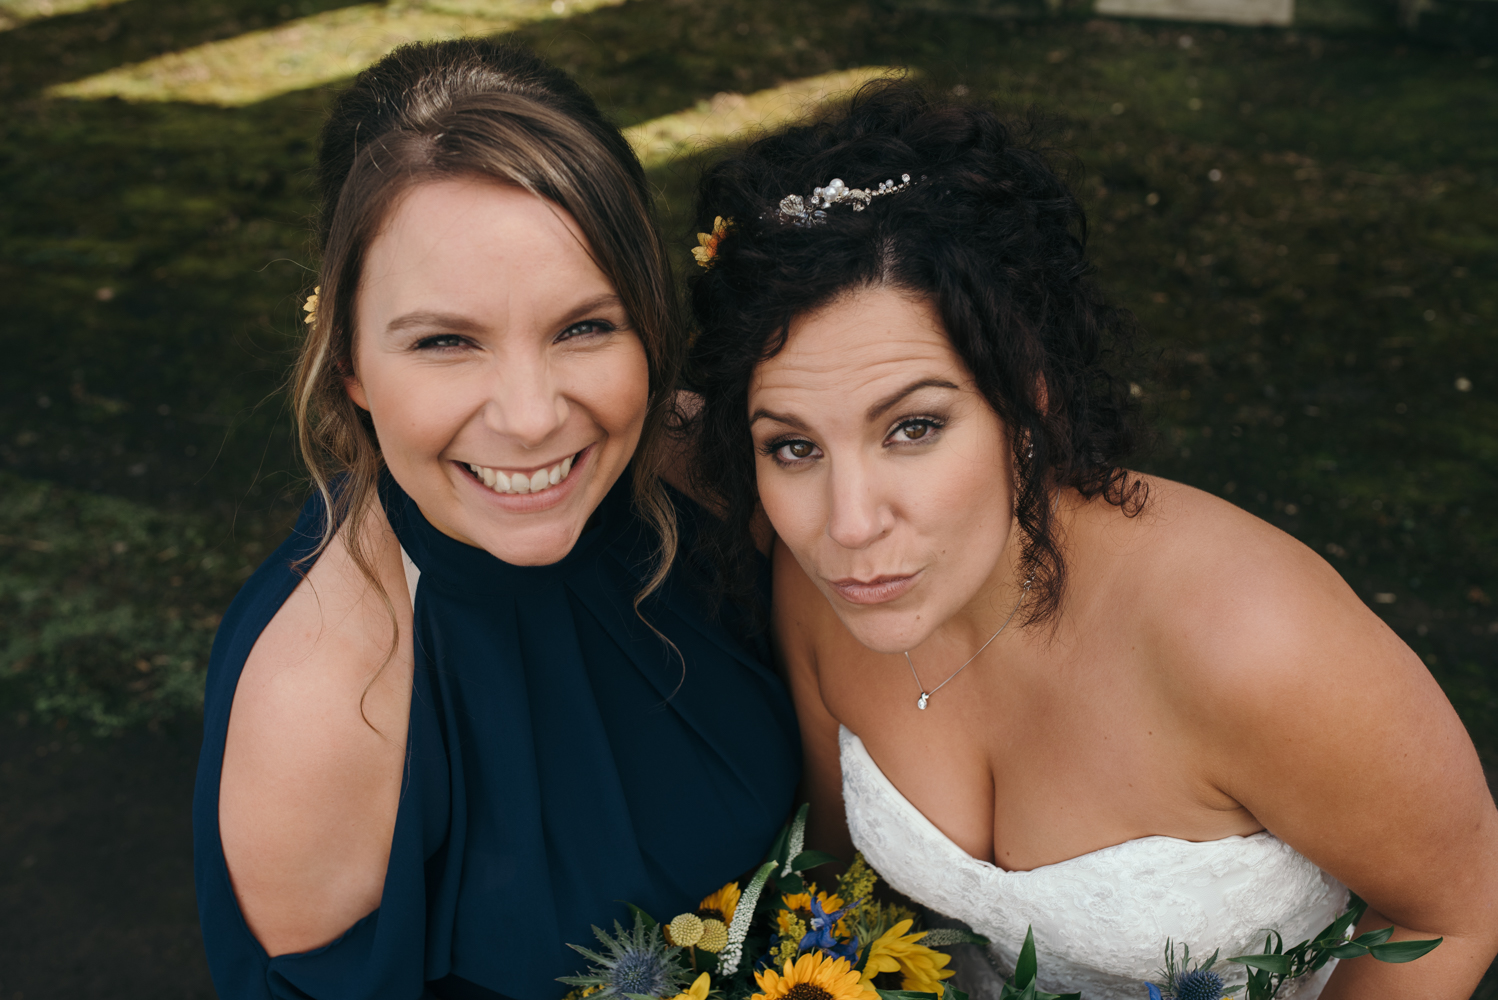 The bride and her sister portrait